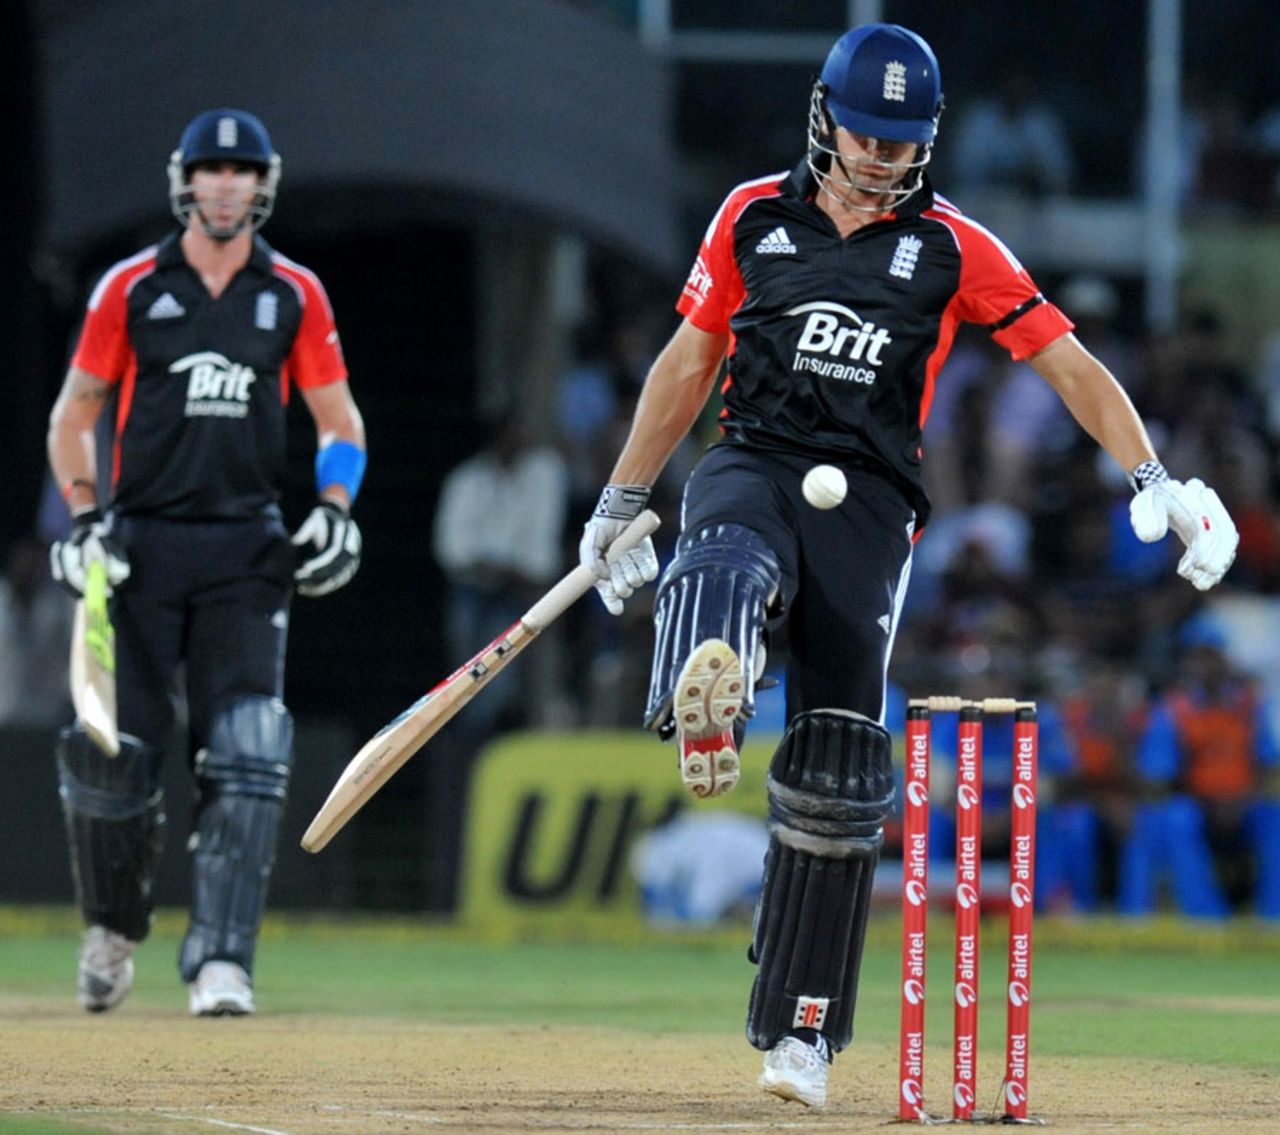 Alastair Cook kicks the ball away from his stumps, India v England, 1st ODI, Hyderabad, October 14, 2011